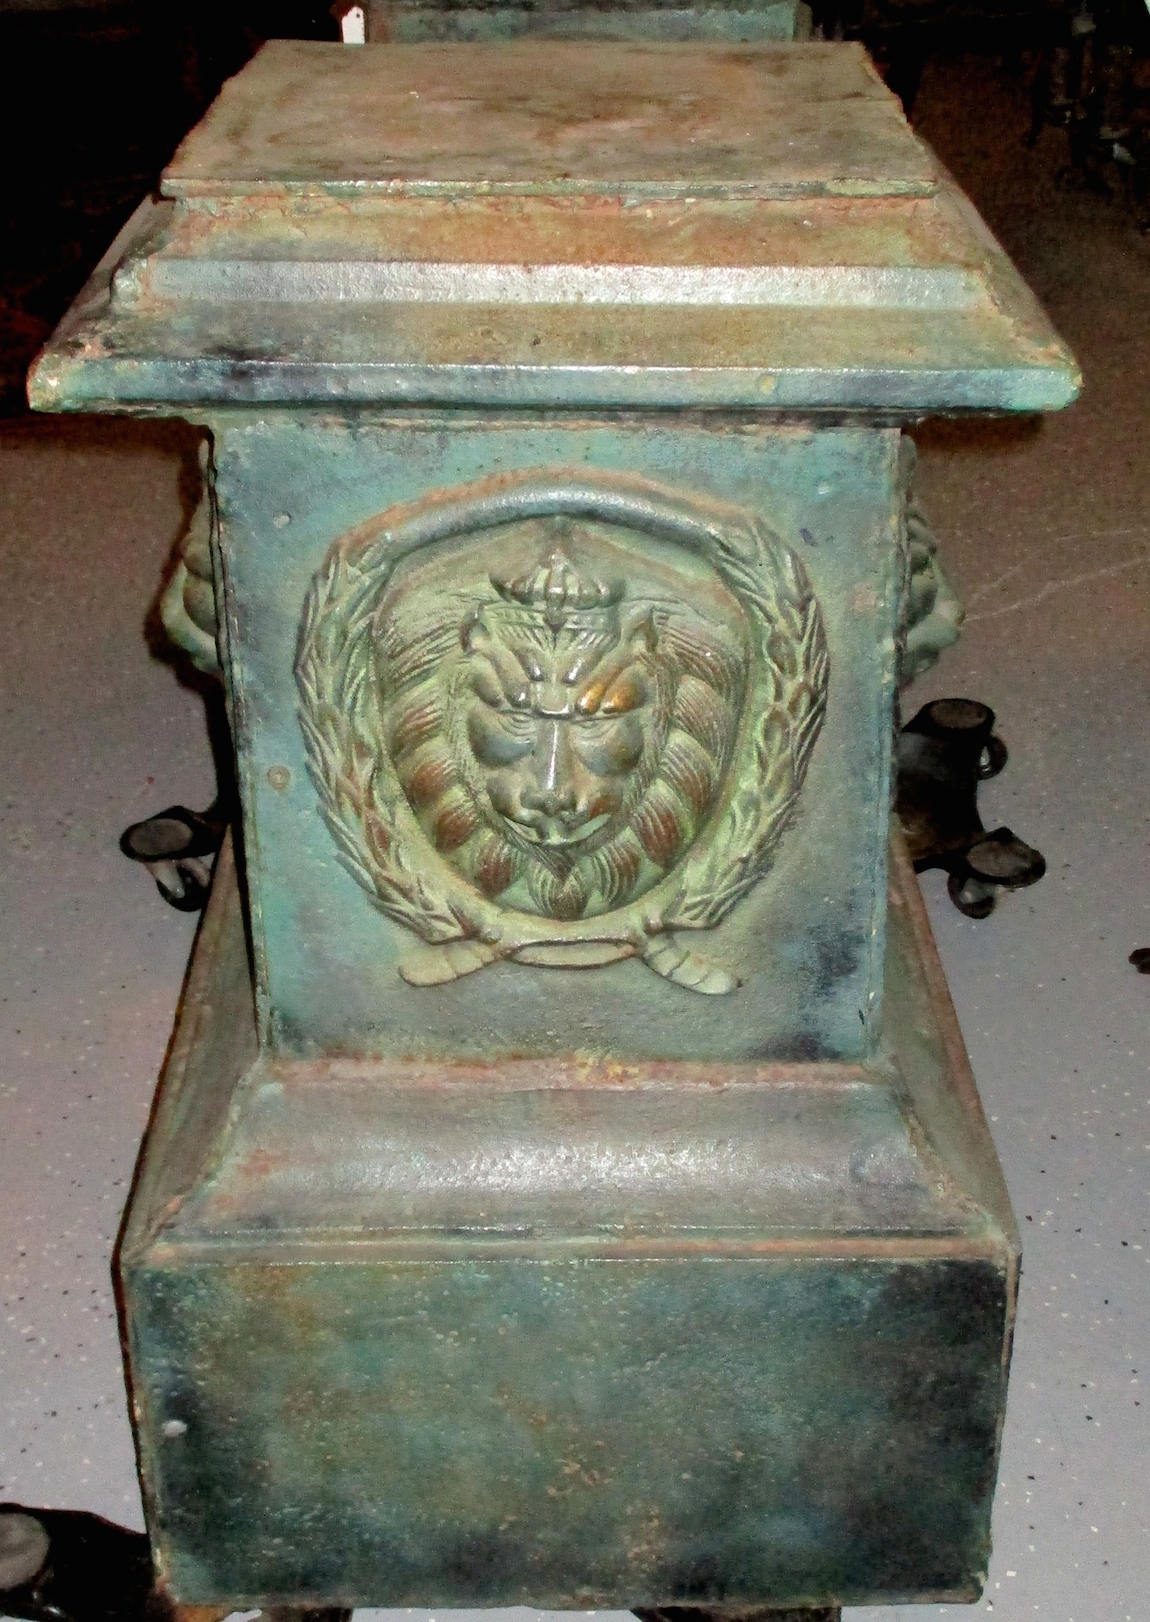 One of a Pair of Large Iron Garden Pedestals (18 1/2" square base x 32" high - SOLD